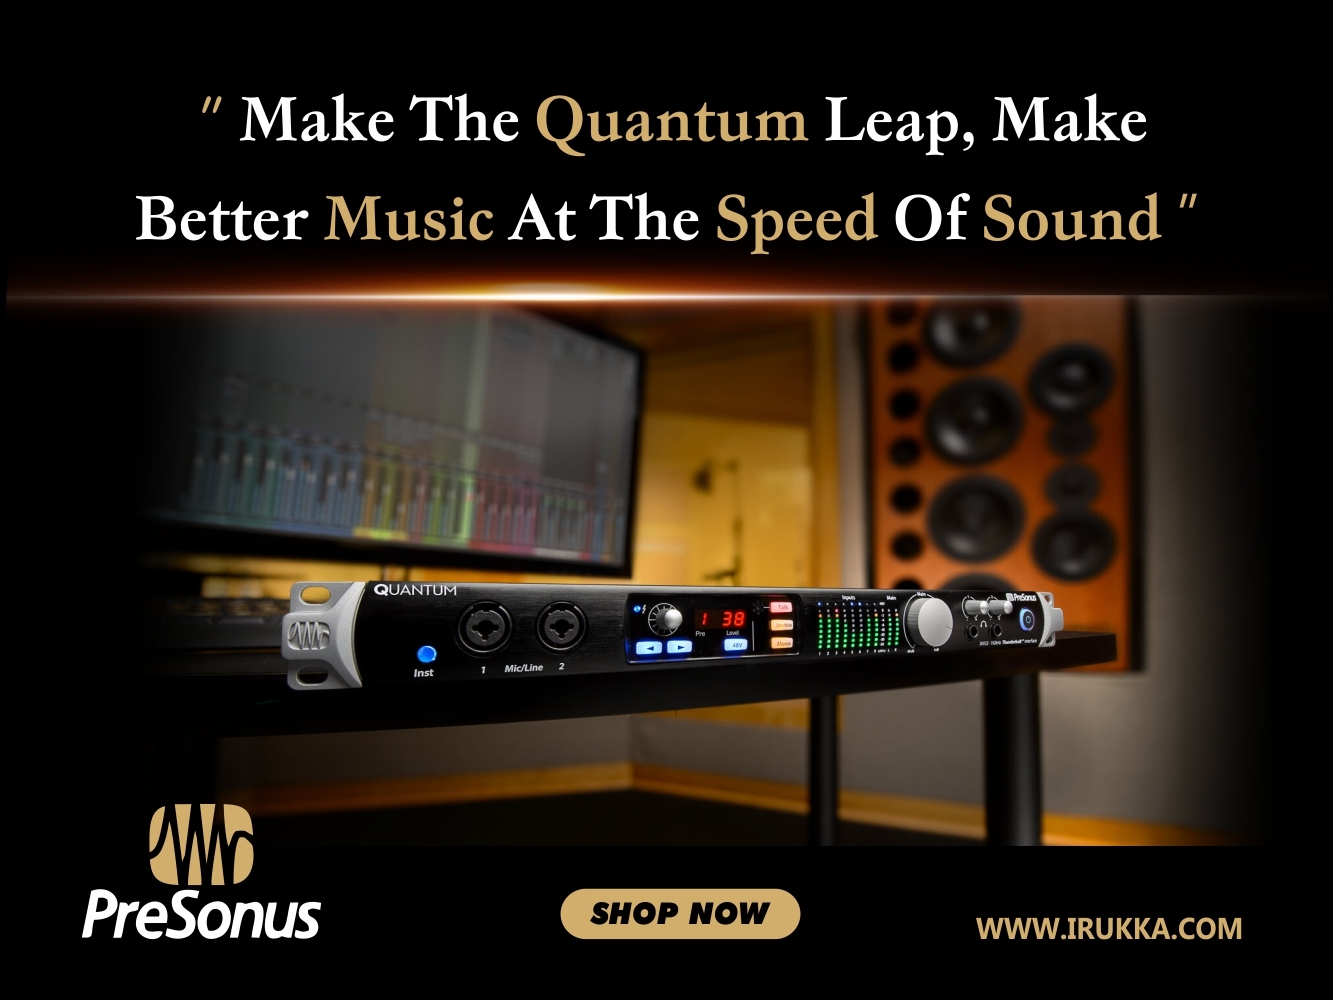 Make The Quantum Leap, Make Better Music at the Speed of Sound